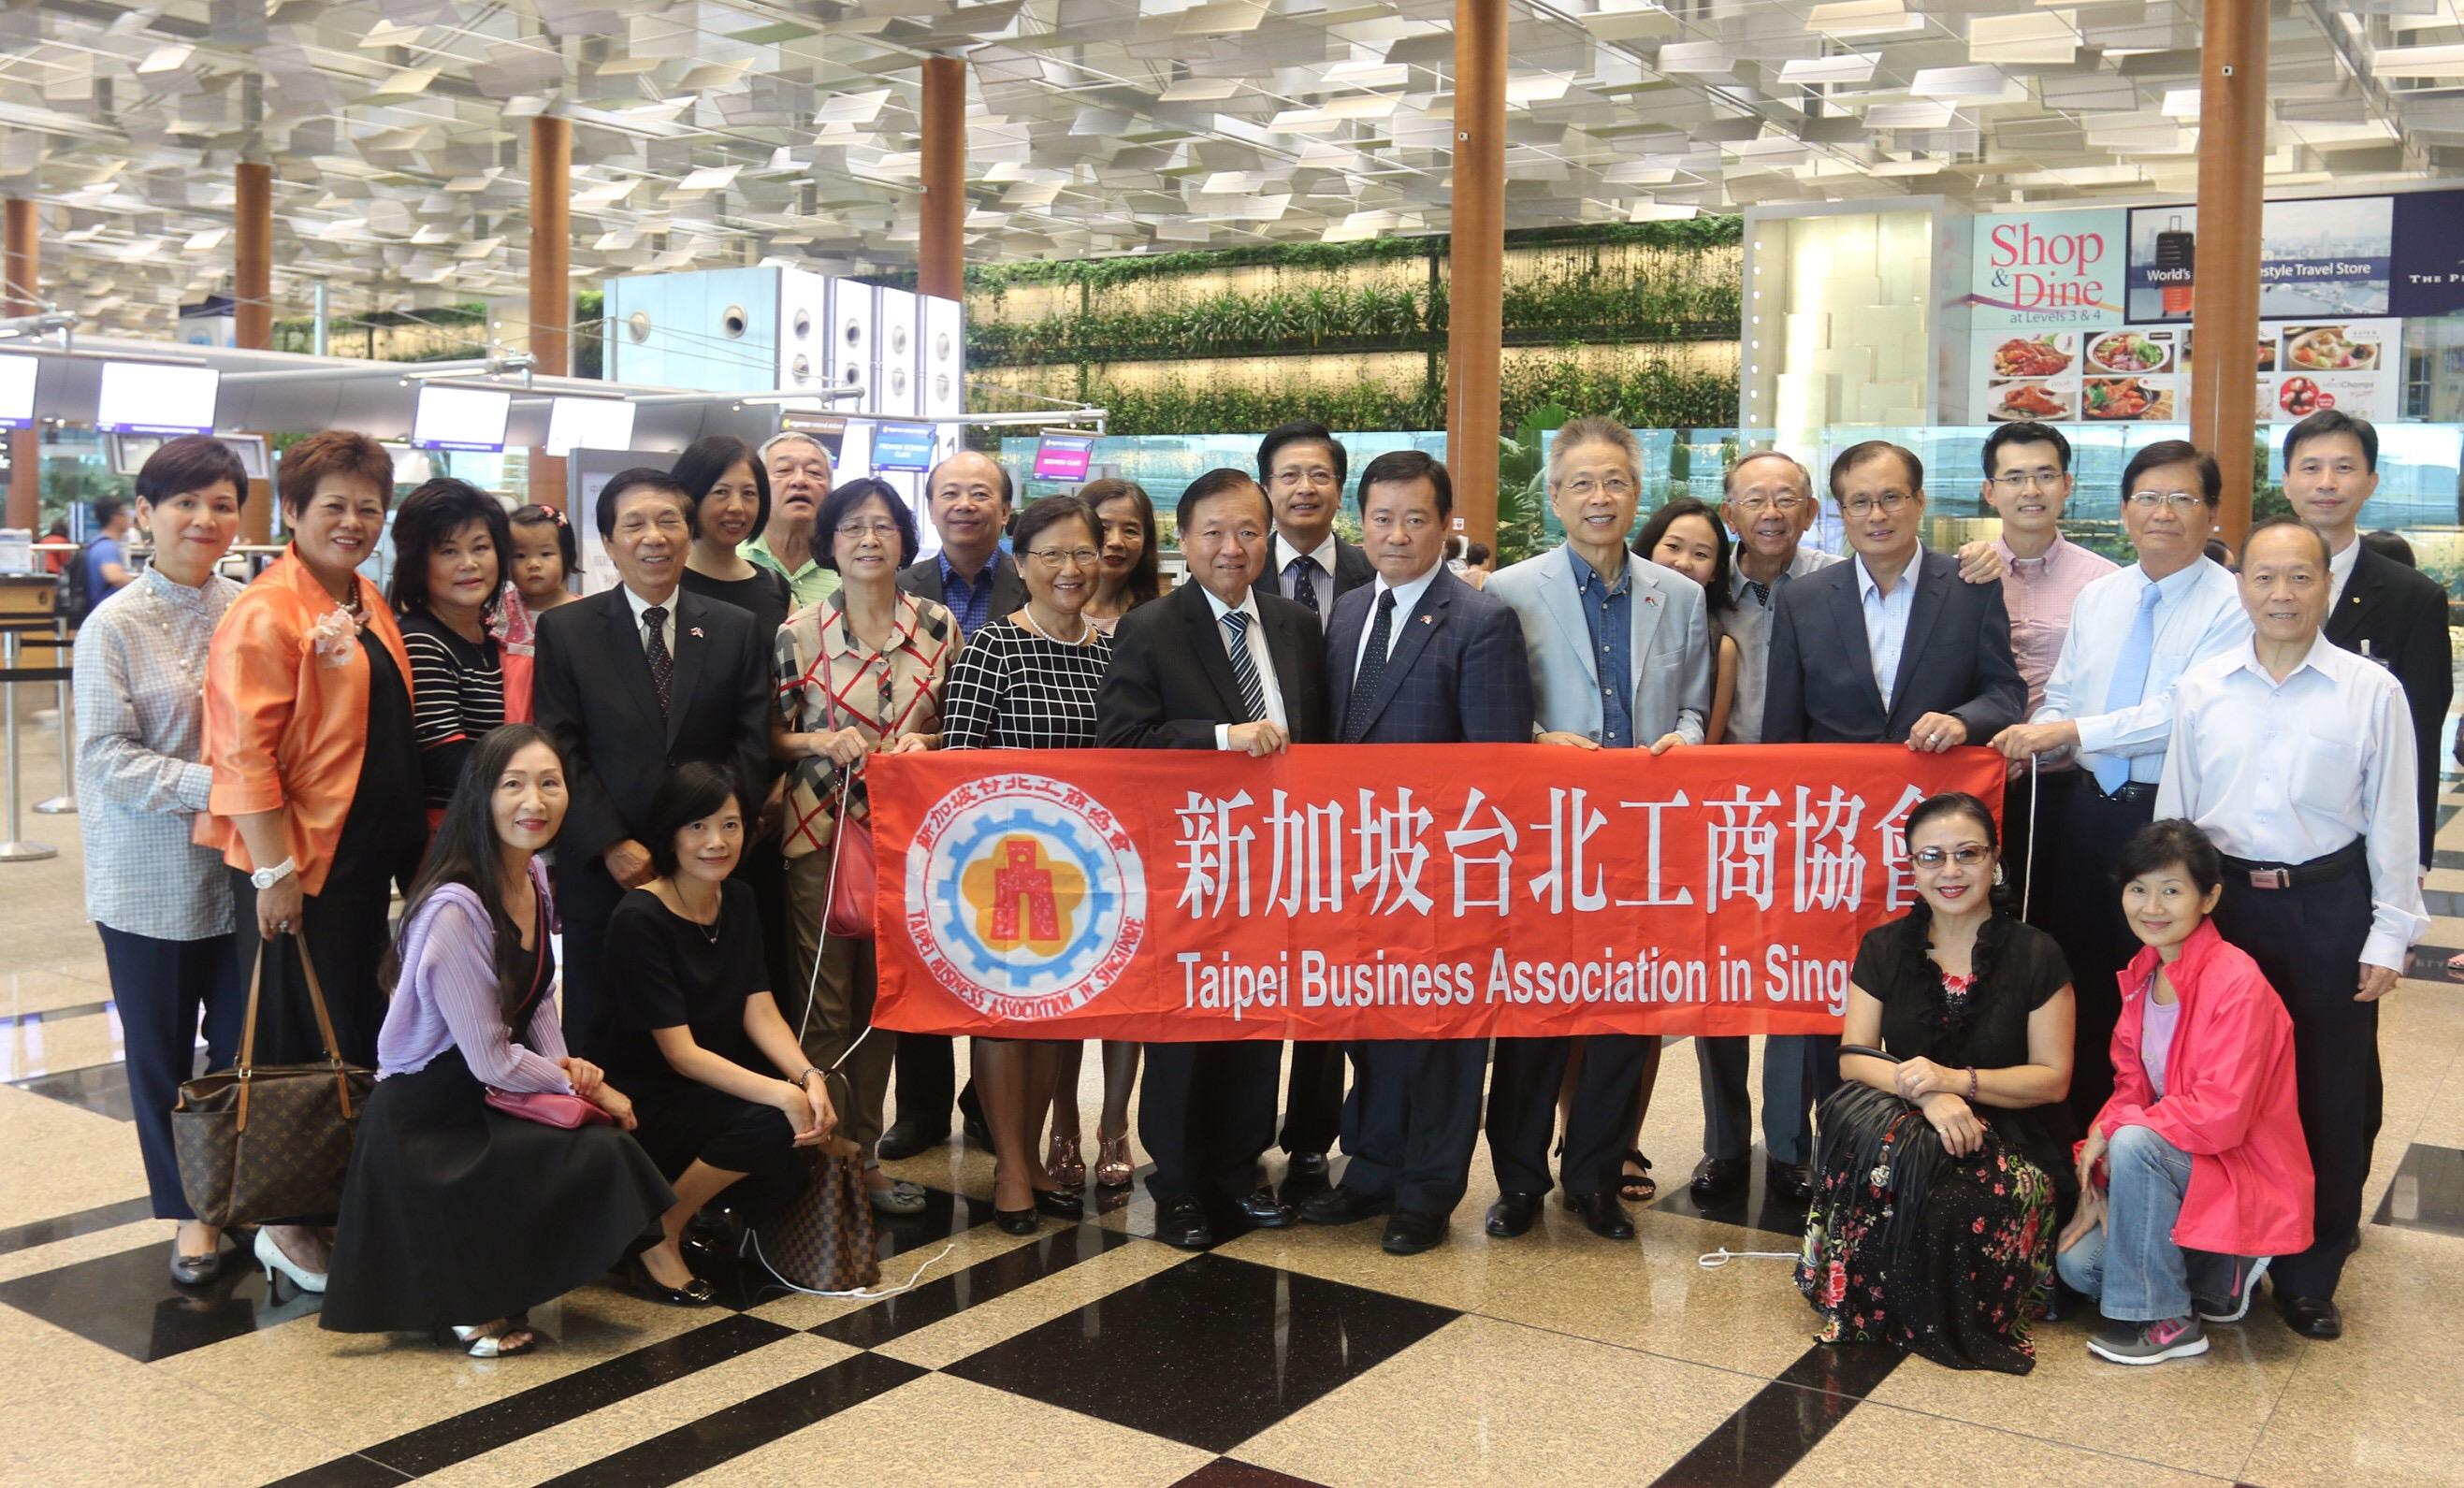 2.	Group photo of Representative and Mrs. Ta-Tung Jacob Chang (front standing row, sixth and seventh from right) and members of the Taipei Business Association in Singapore at the airport farewell.  